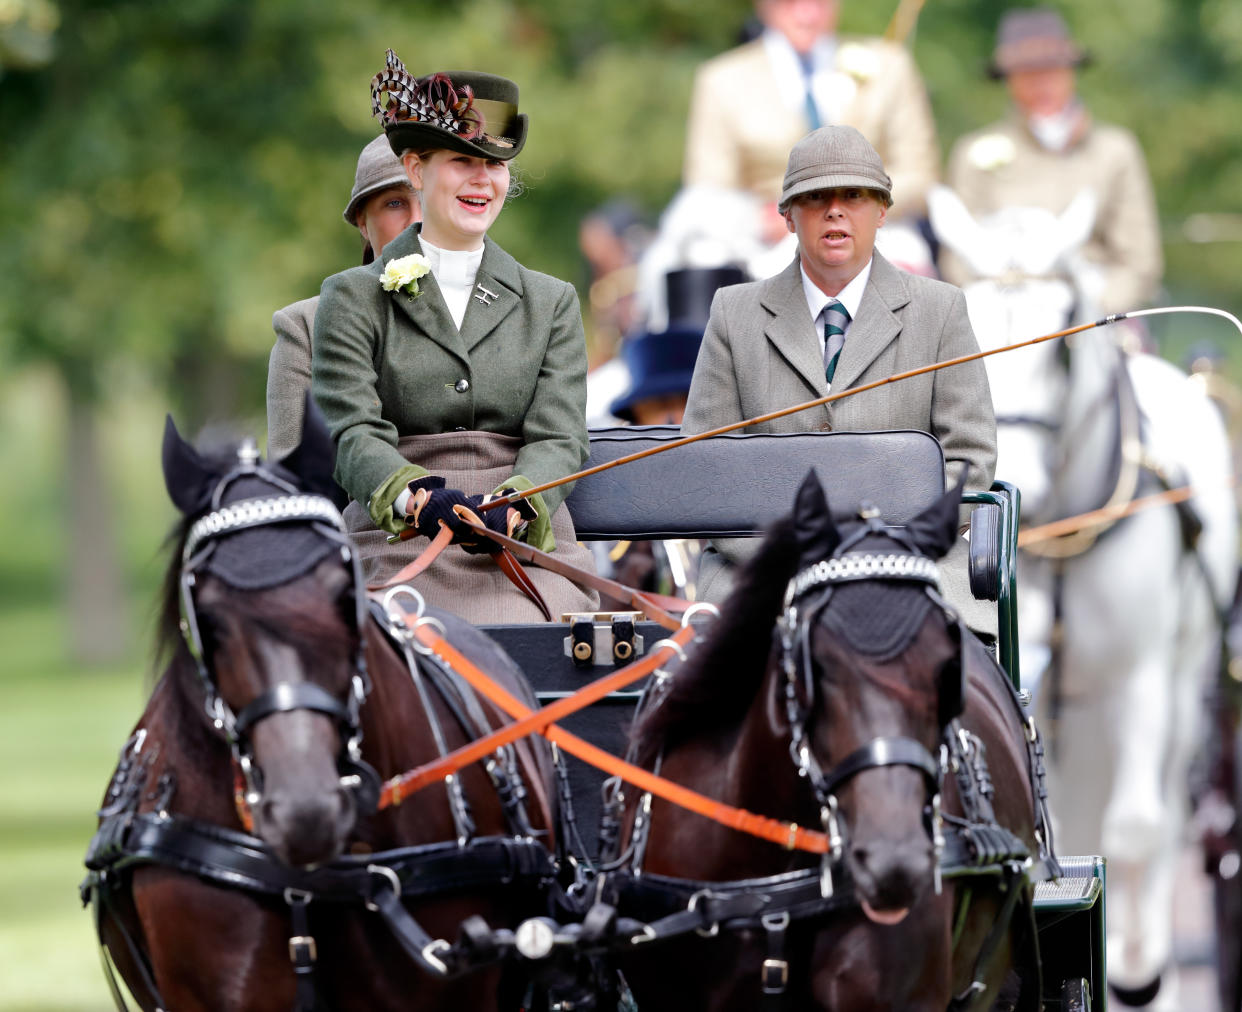 WINDSOR, UNITED KINGDOM - JULY 04: (EMBARGOED FOR PUBLICATION IN UK NEWSPAPERS UNTIL 24 HOURS AFTER CREATE DATE AND TIME) Lady Louise Windsor takes part in 'The Champagne Laurent-Perrier Meet of The British Driving Society' on day 4 of the Royal Windsor Horse Show in Home Park, Windsor Castle on July 4, 2021 in Windsor, England. (Photo by Max Mumby/Indigo/Getty Images)